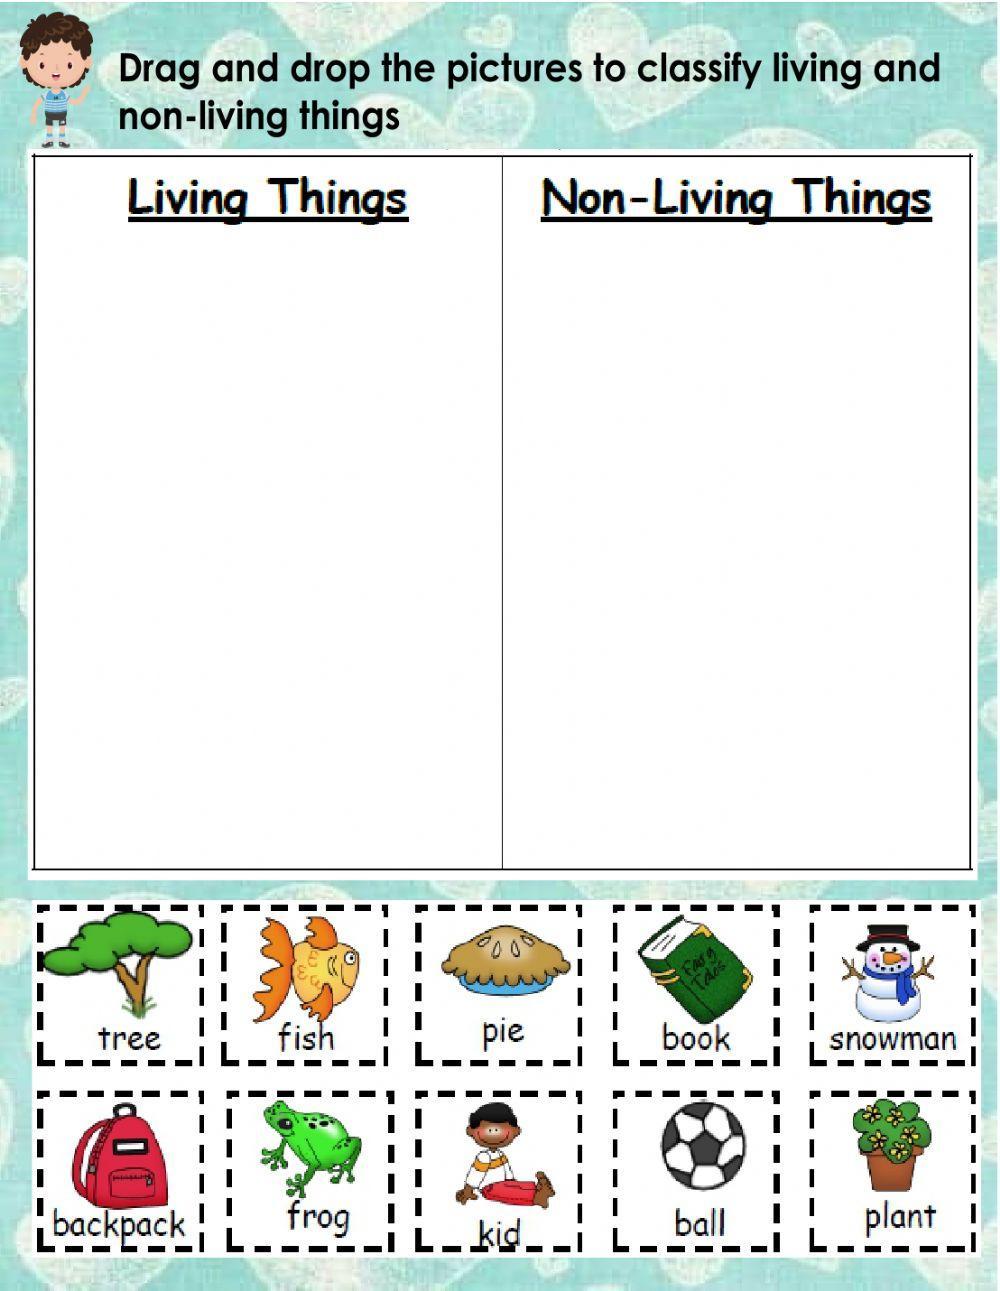 Living and non-living things